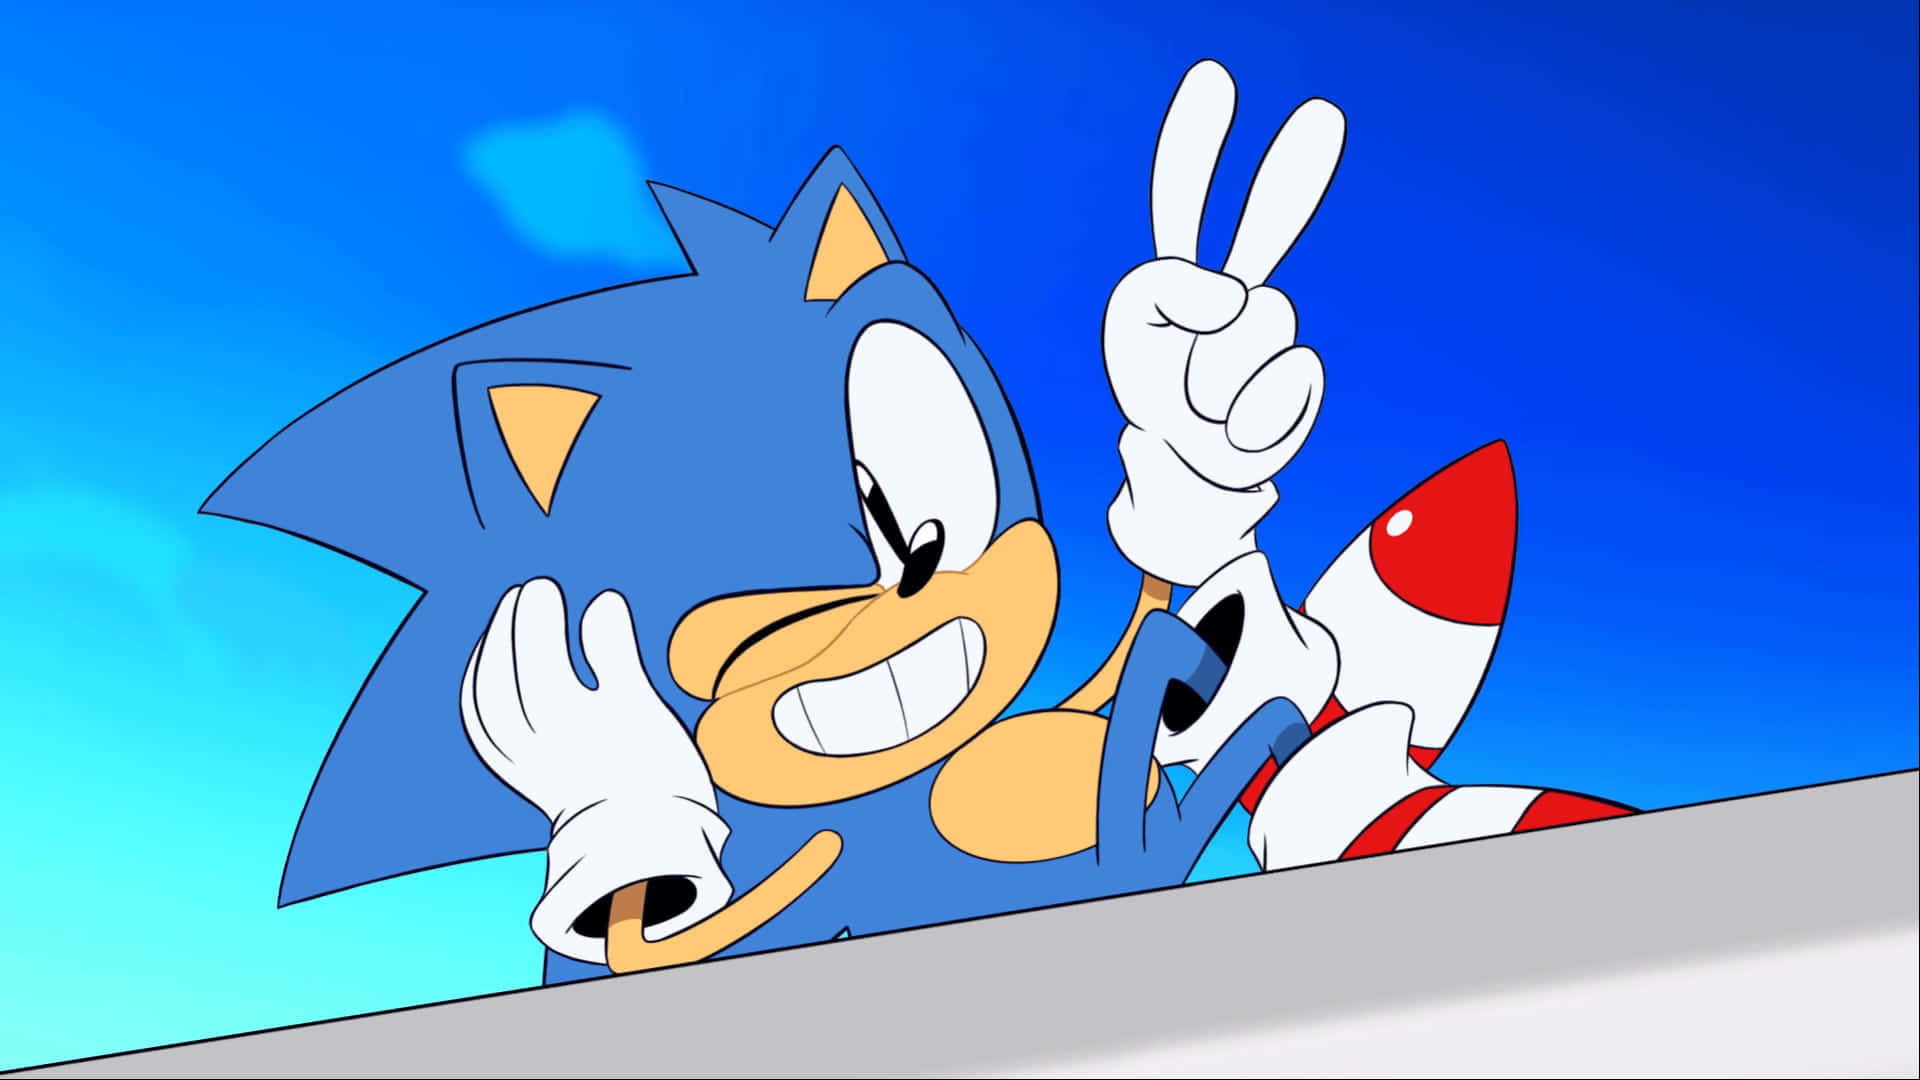 Caption: Sonic Adventure HD - Sonic and Tails in Action Wallpaper